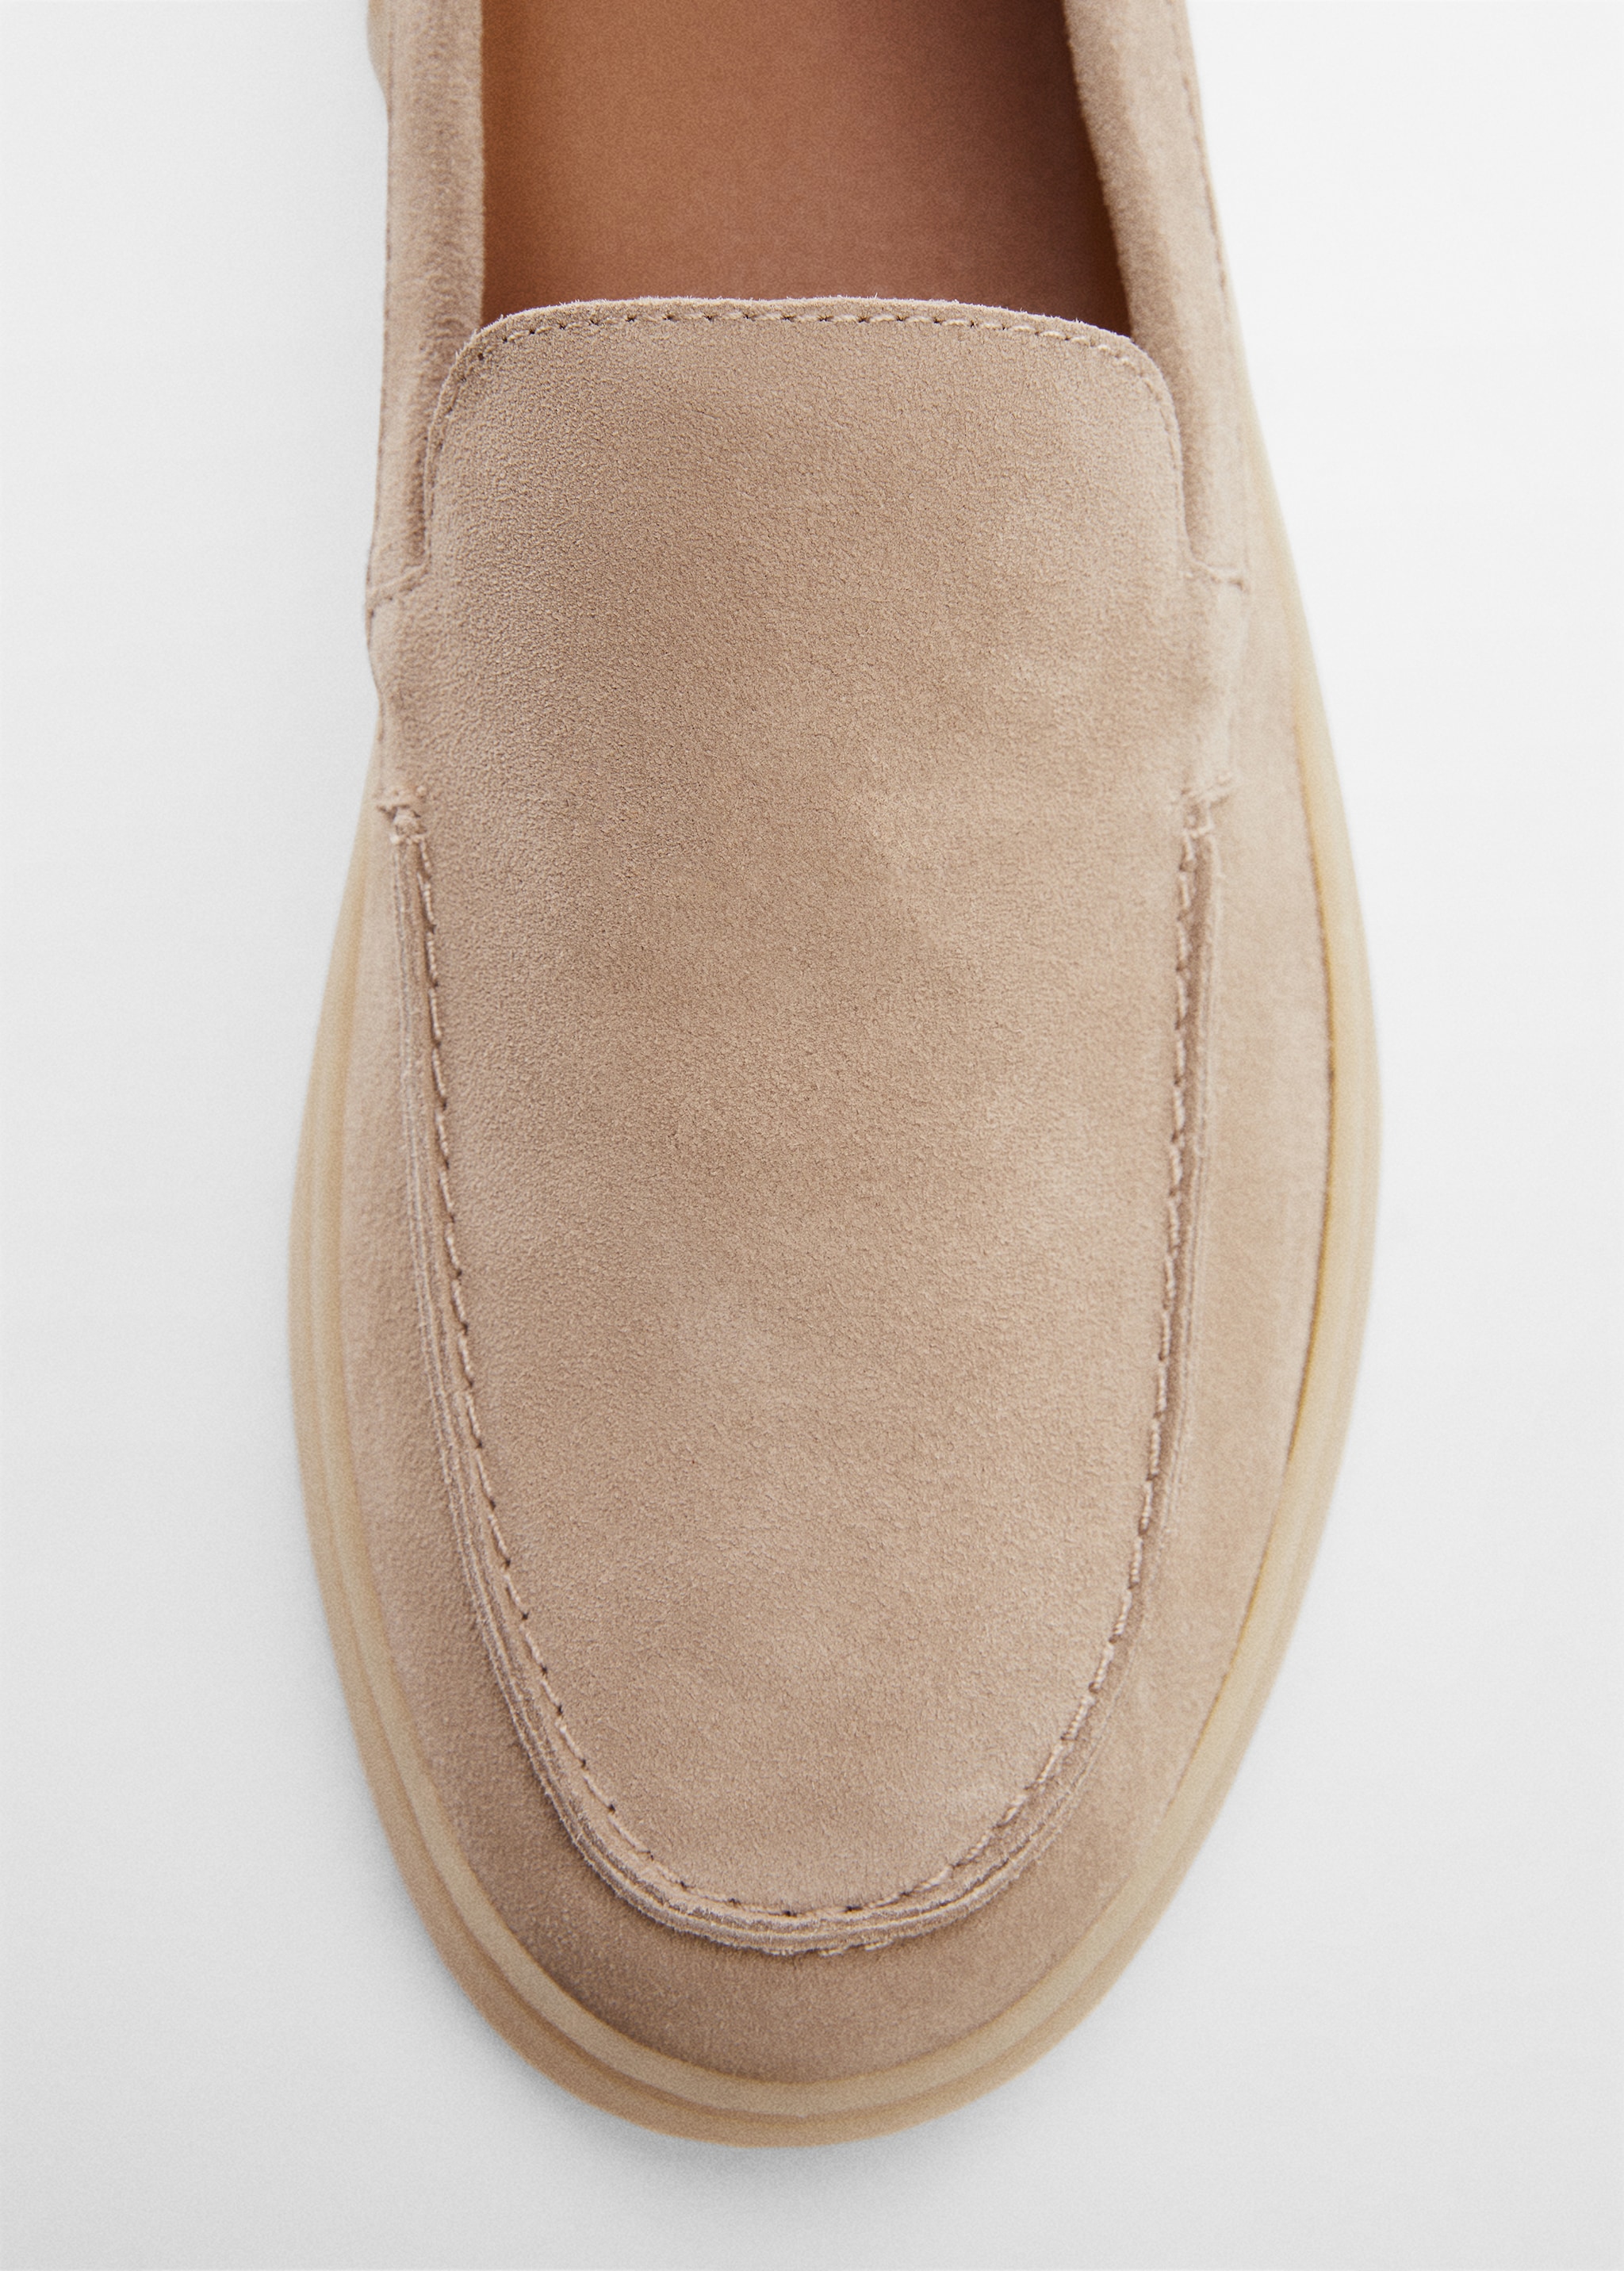 Split leather shoes - Details of the article 2